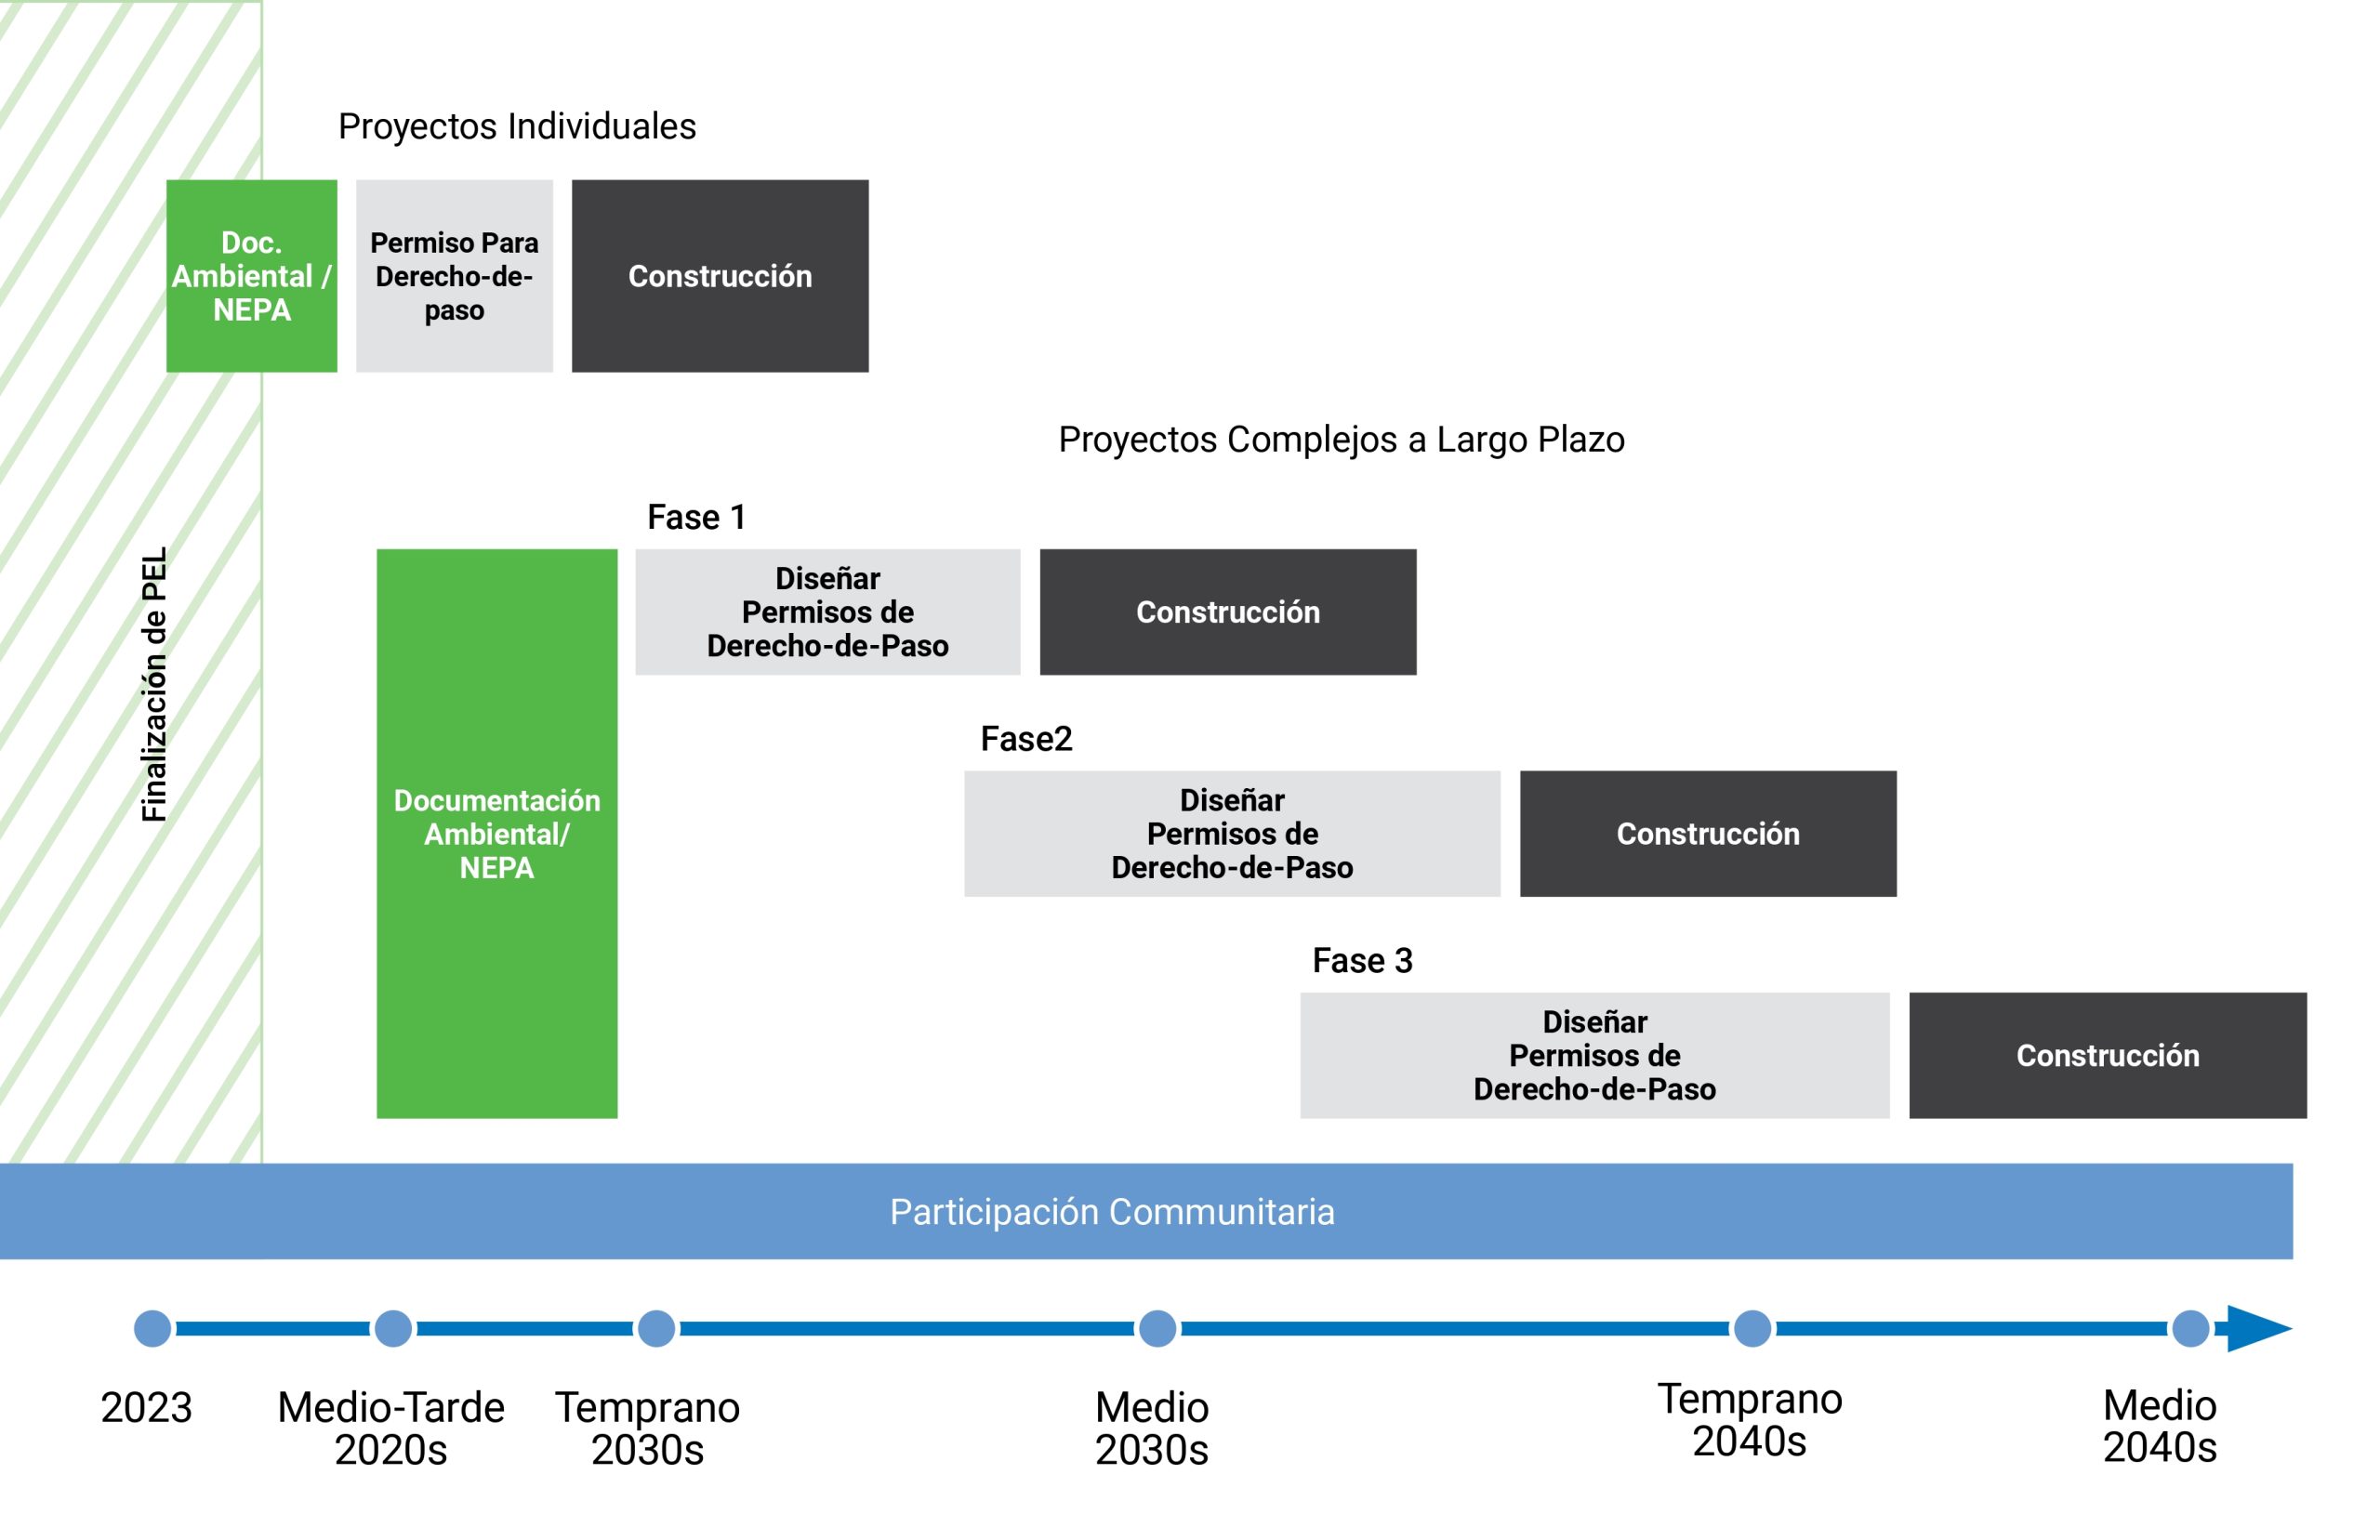 Graphic showing project timeline with various phases identified, including Concept Study, Detailed Environmental Study, Initiate Project, and Construction.